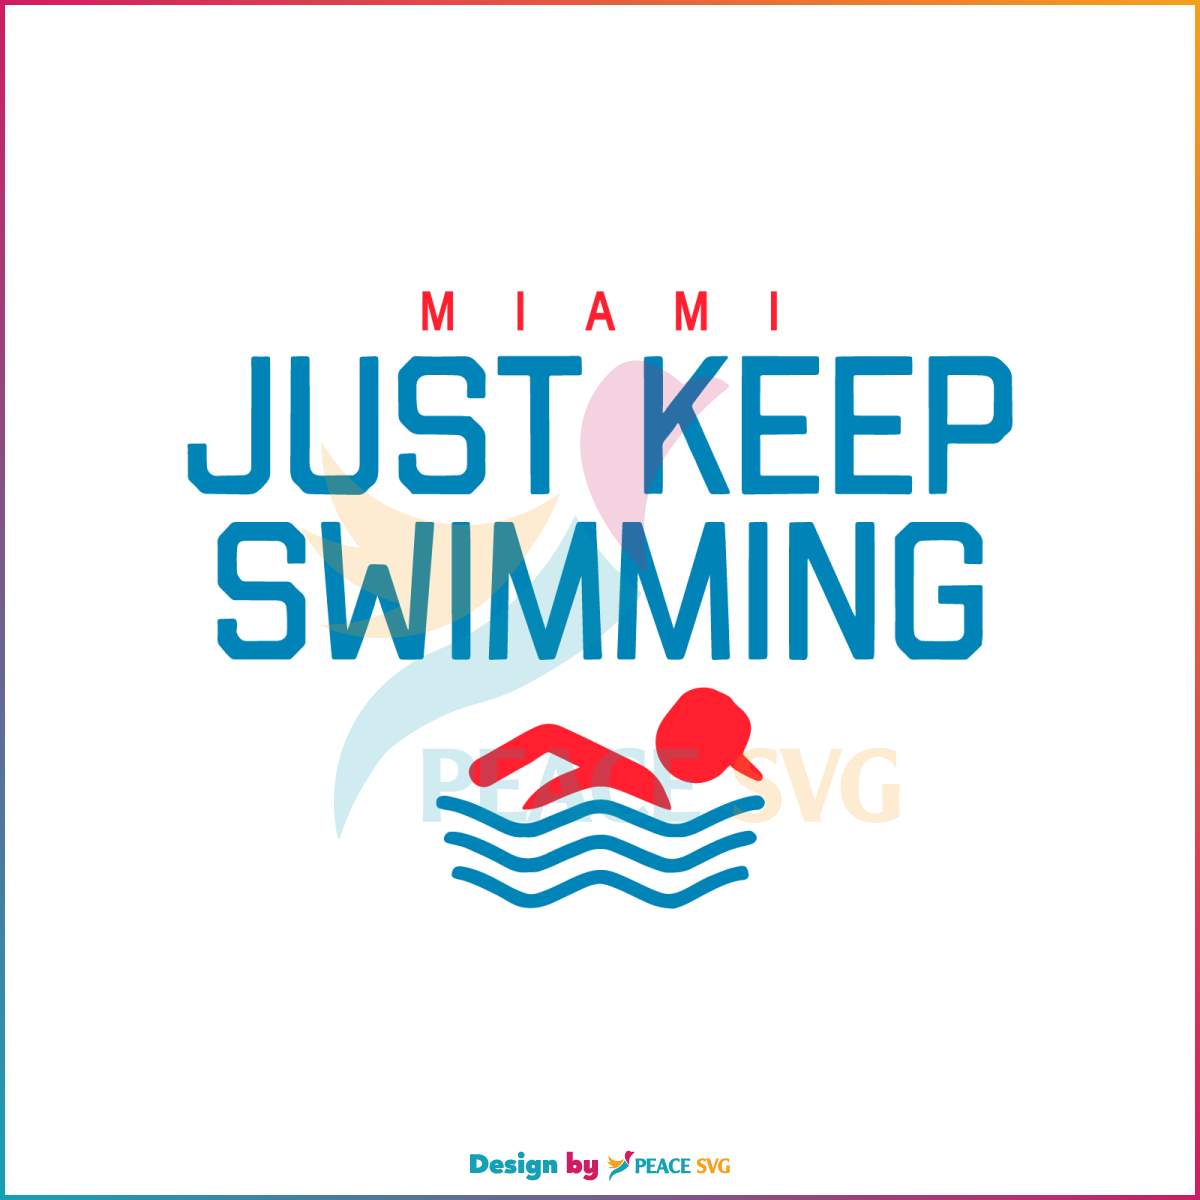 miami-marlins-just-keep-swimming-svg-graphic-design-file